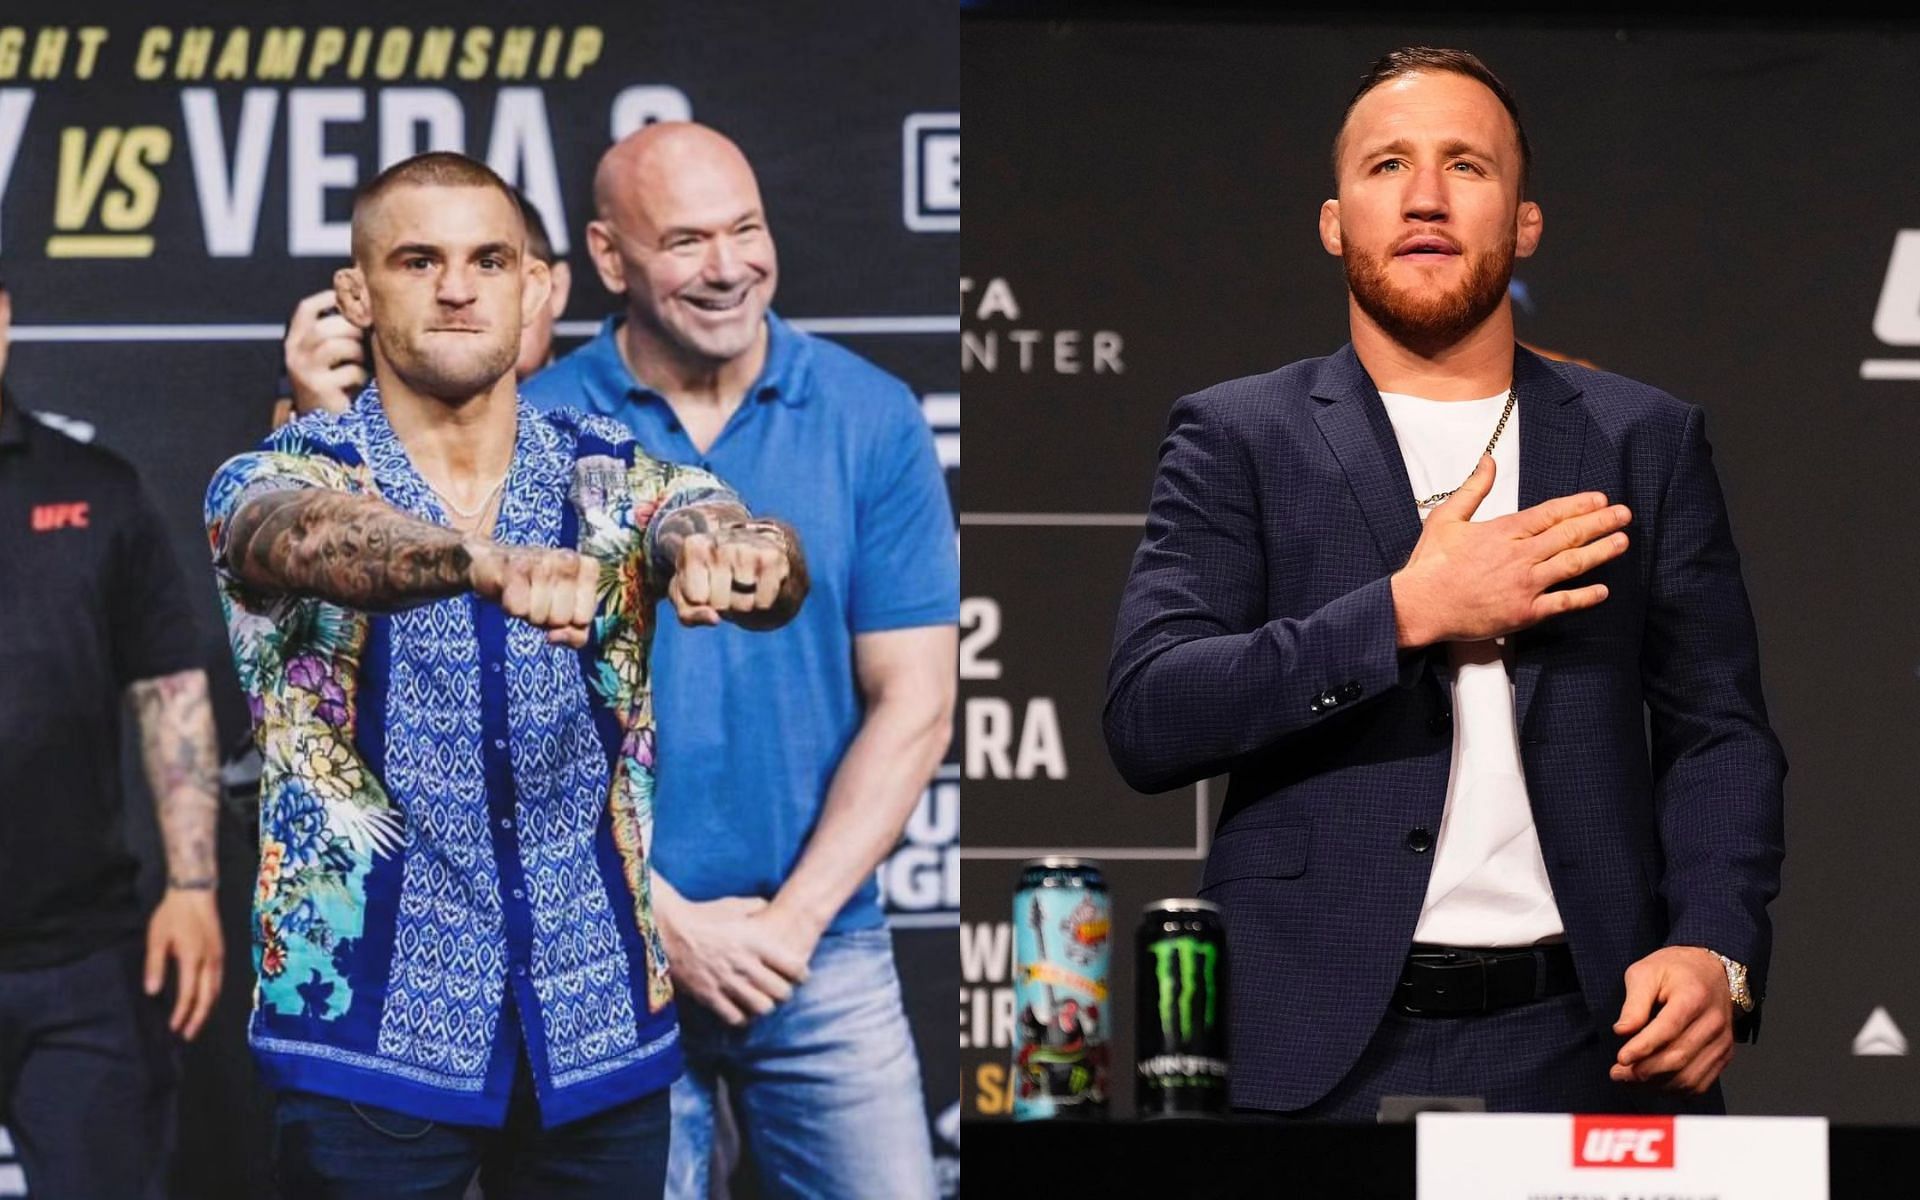 Dustin Poirier (left) reflected on a trilogy fight with Justin Gaethje (right) in the future [Image courtesy:  @dustinpoirier and @justin_gaethje on Instagram]